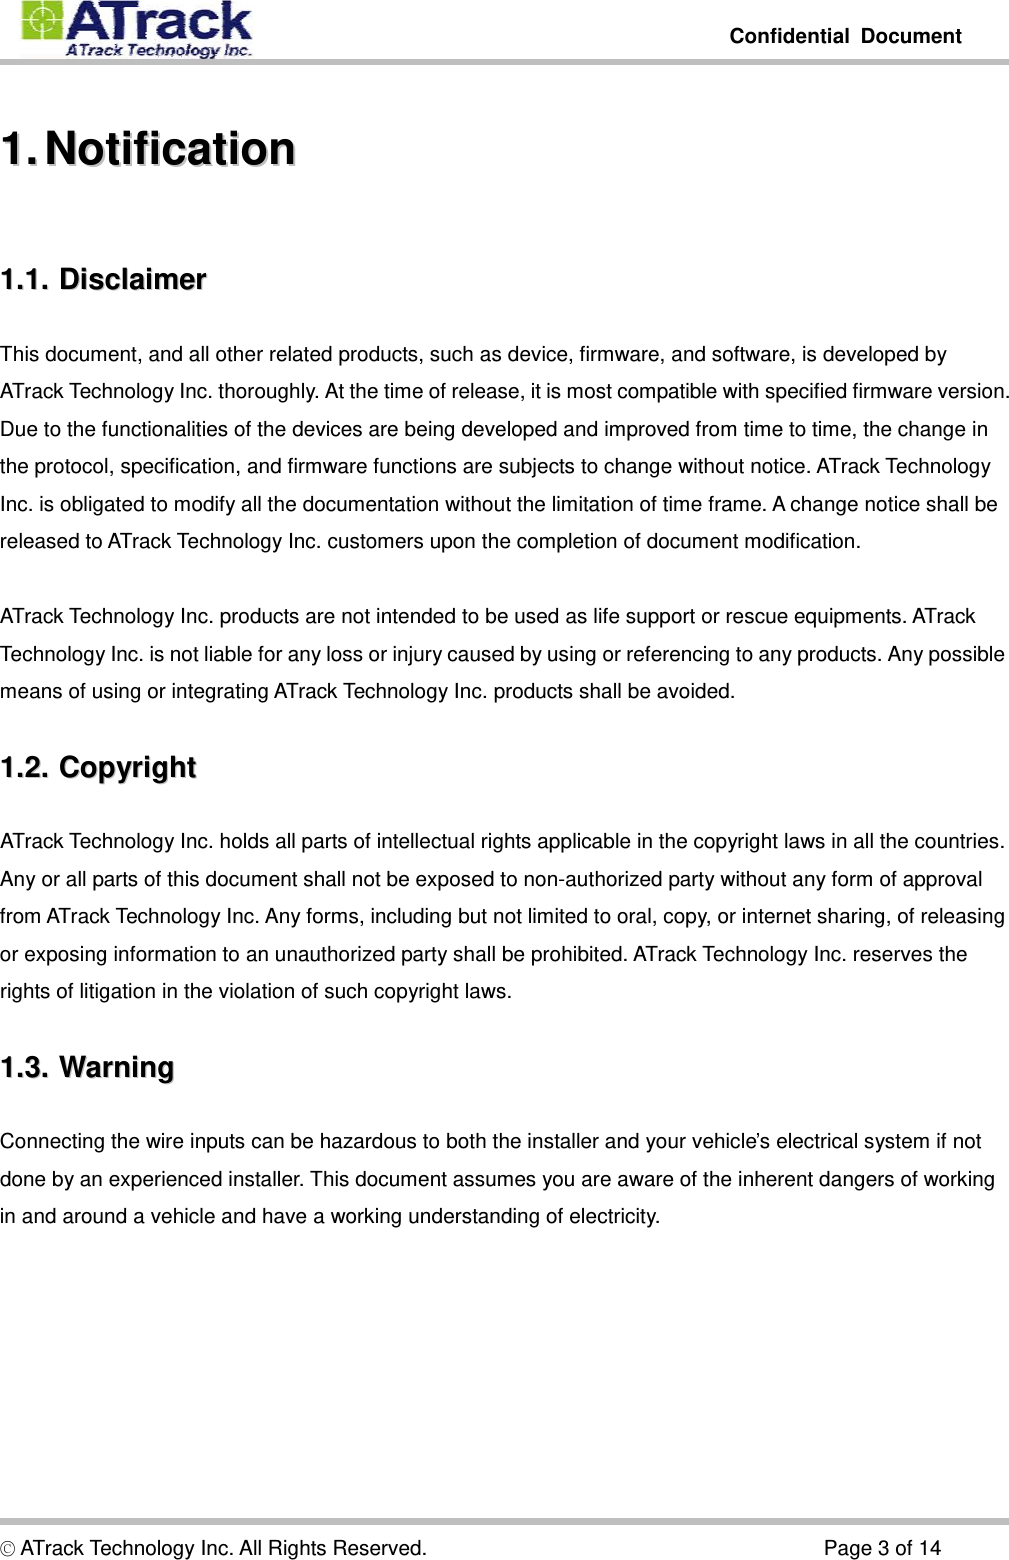         Confidential Document  © ATrack Technology Inc. All Rights Reserved.                                      Page 3 of 14 11..  NNoottiiffiiccaattiioonn  11..11..  DDiissccllaaiimmeerr  This document, and all other related products, such as device, firmware, and software, is developed by ATrack Technology Inc. thoroughly. At the time of release, it is most compatible with specified firmware version. Due to the functionalities of the devices are being developed and improved from time to time, the change in the protocol, specification, and firmware functions are subjects to change without notice. ATrack Technology Inc. is obligated to modify all the documentation without the limitation of time frame. A change notice shall be released to ATrack Technology Inc. customers upon the completion of document modification.  ATrack Technology Inc. products are not intended to be used as life support or rescue equipments. ATrack Technology Inc. is not liable for any loss or injury caused by using or referencing to any products. Any possible means of using or integrating ATrack Technology Inc. products shall be avoided. 11..22..  CCooppyyrriigghhtt  ATrack Technology Inc. holds all parts of intellectual rights applicable in the copyright laws in all the countries. Any or all parts of this document shall not be exposed to non-authorized party without any form of approval from ATrack Technology Inc. Any forms, including but not limited to oral, copy, or internet sharing, of releasing or exposing information to an unauthorized party shall be prohibited. ATrack Technology Inc. reserves the rights of litigation in the violation of such copyright laws. 11..33..  WWaarrnniinngg  Connecting the wire inputs can be hazardous to both the installer and your vehicle’s electrical system if not done by an experienced installer. This document assumes you are aware of the inherent dangers of working in and around a vehicle and have a working understanding of electricity. 